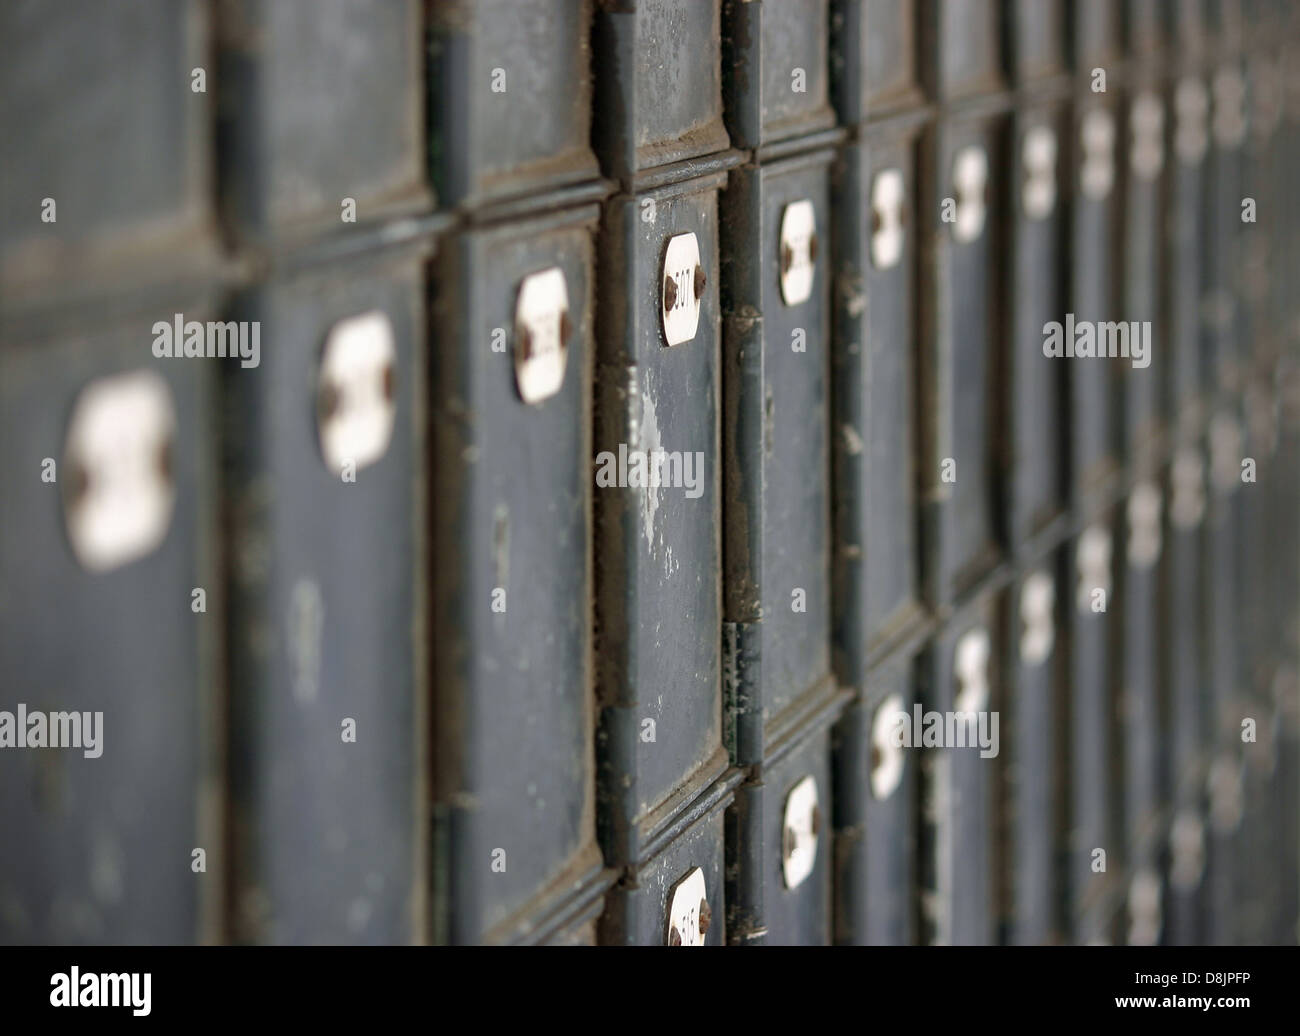 Many rows of old fashioned mailboxes that are weathered and worn Stock Photo